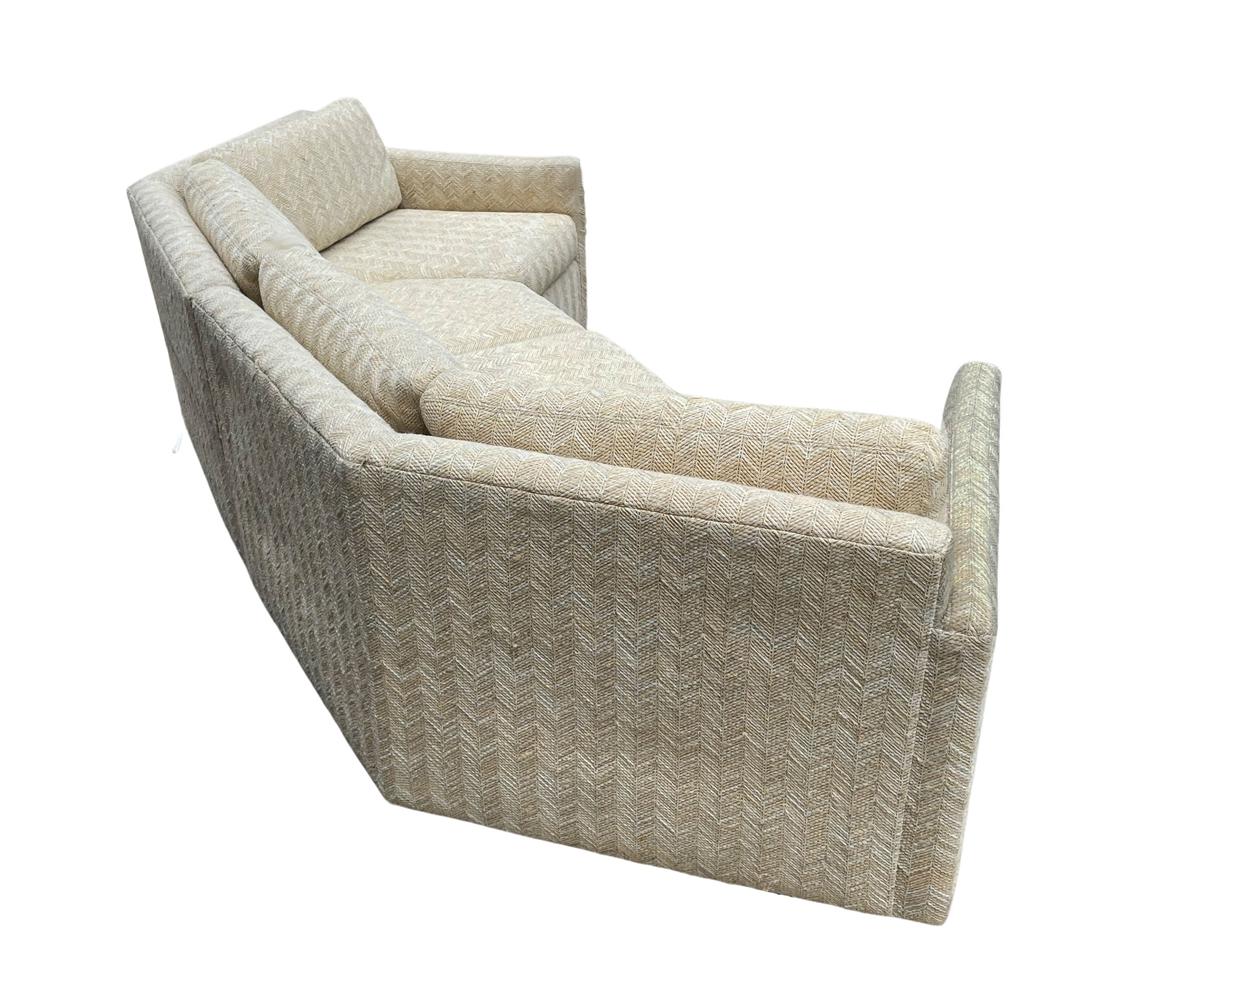 Late 20th Century Vintage Mid-Century Modern Hexagonal Curved Sectional Sofa after Harvey Probber